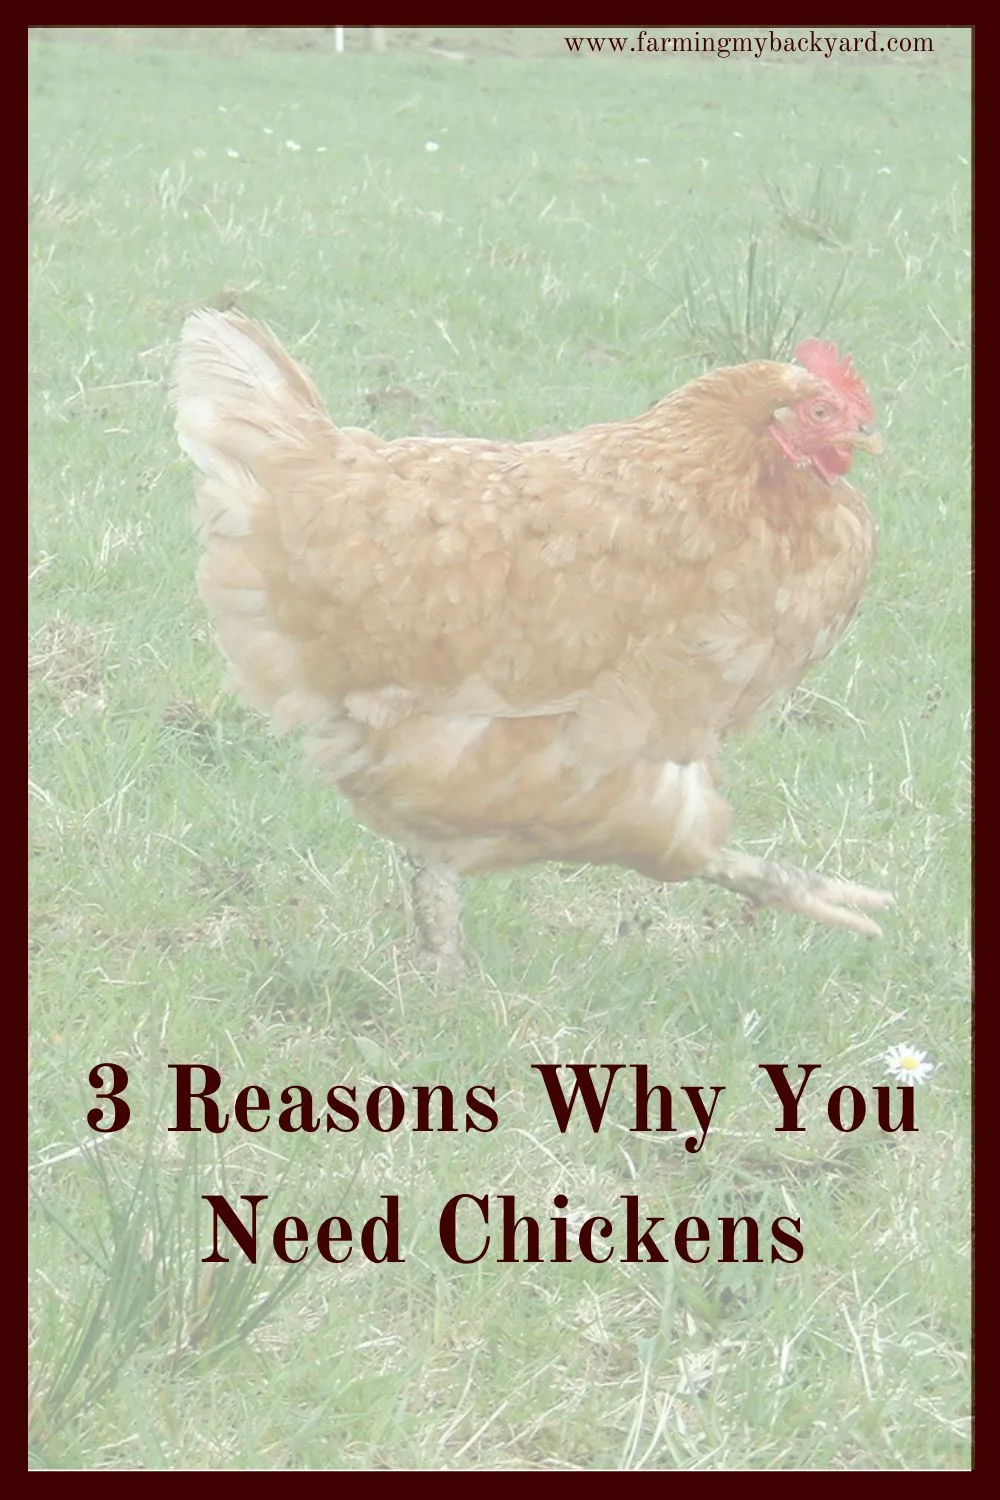 You need chickens in your life!  Here are three reasons why you should consider starting your own flock of chickens.